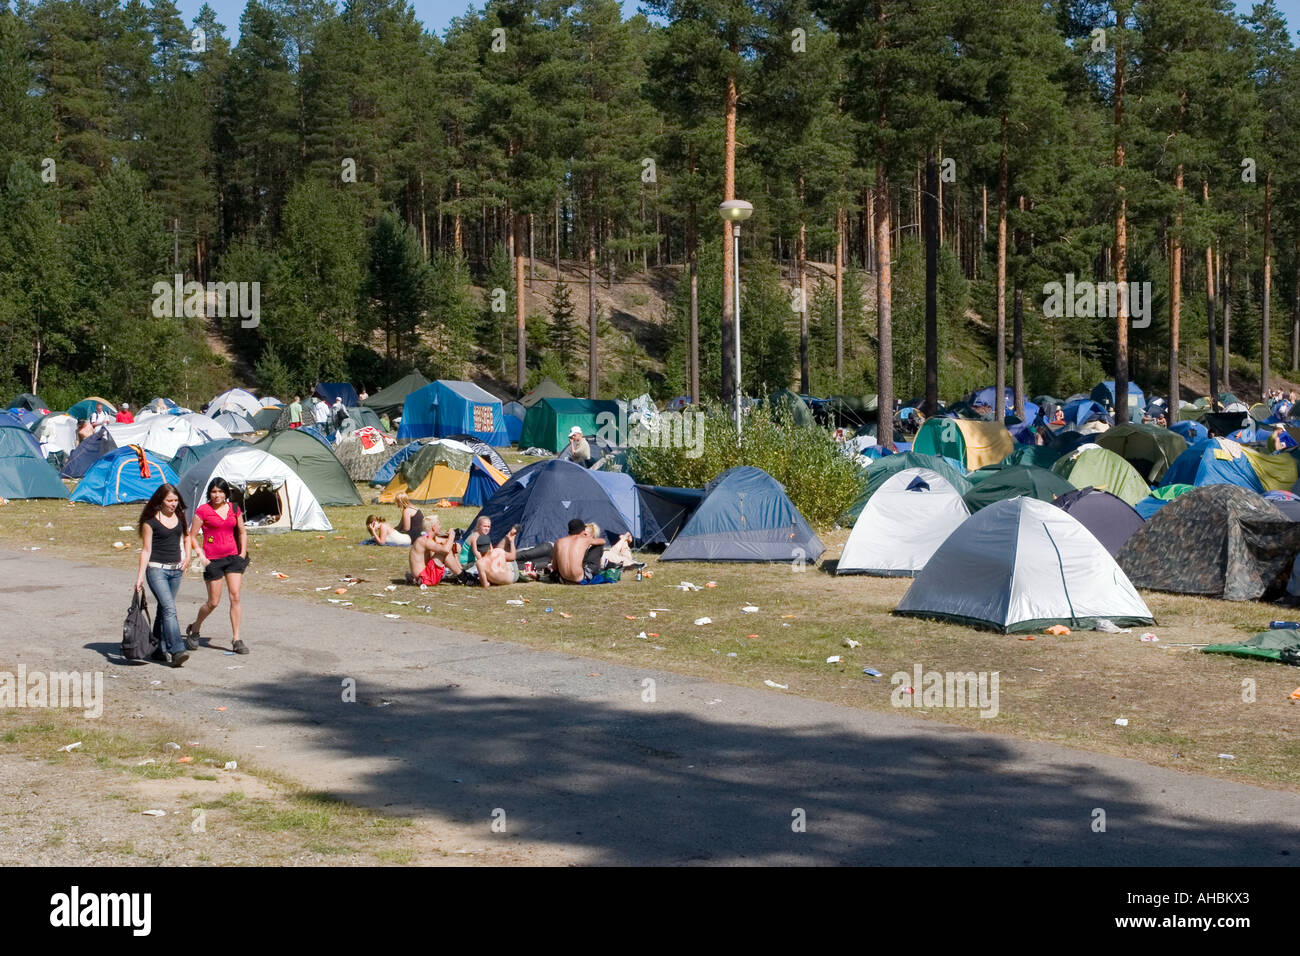 Camping Festival Garbage High Resolution Stock Photography and Images -  Alamy